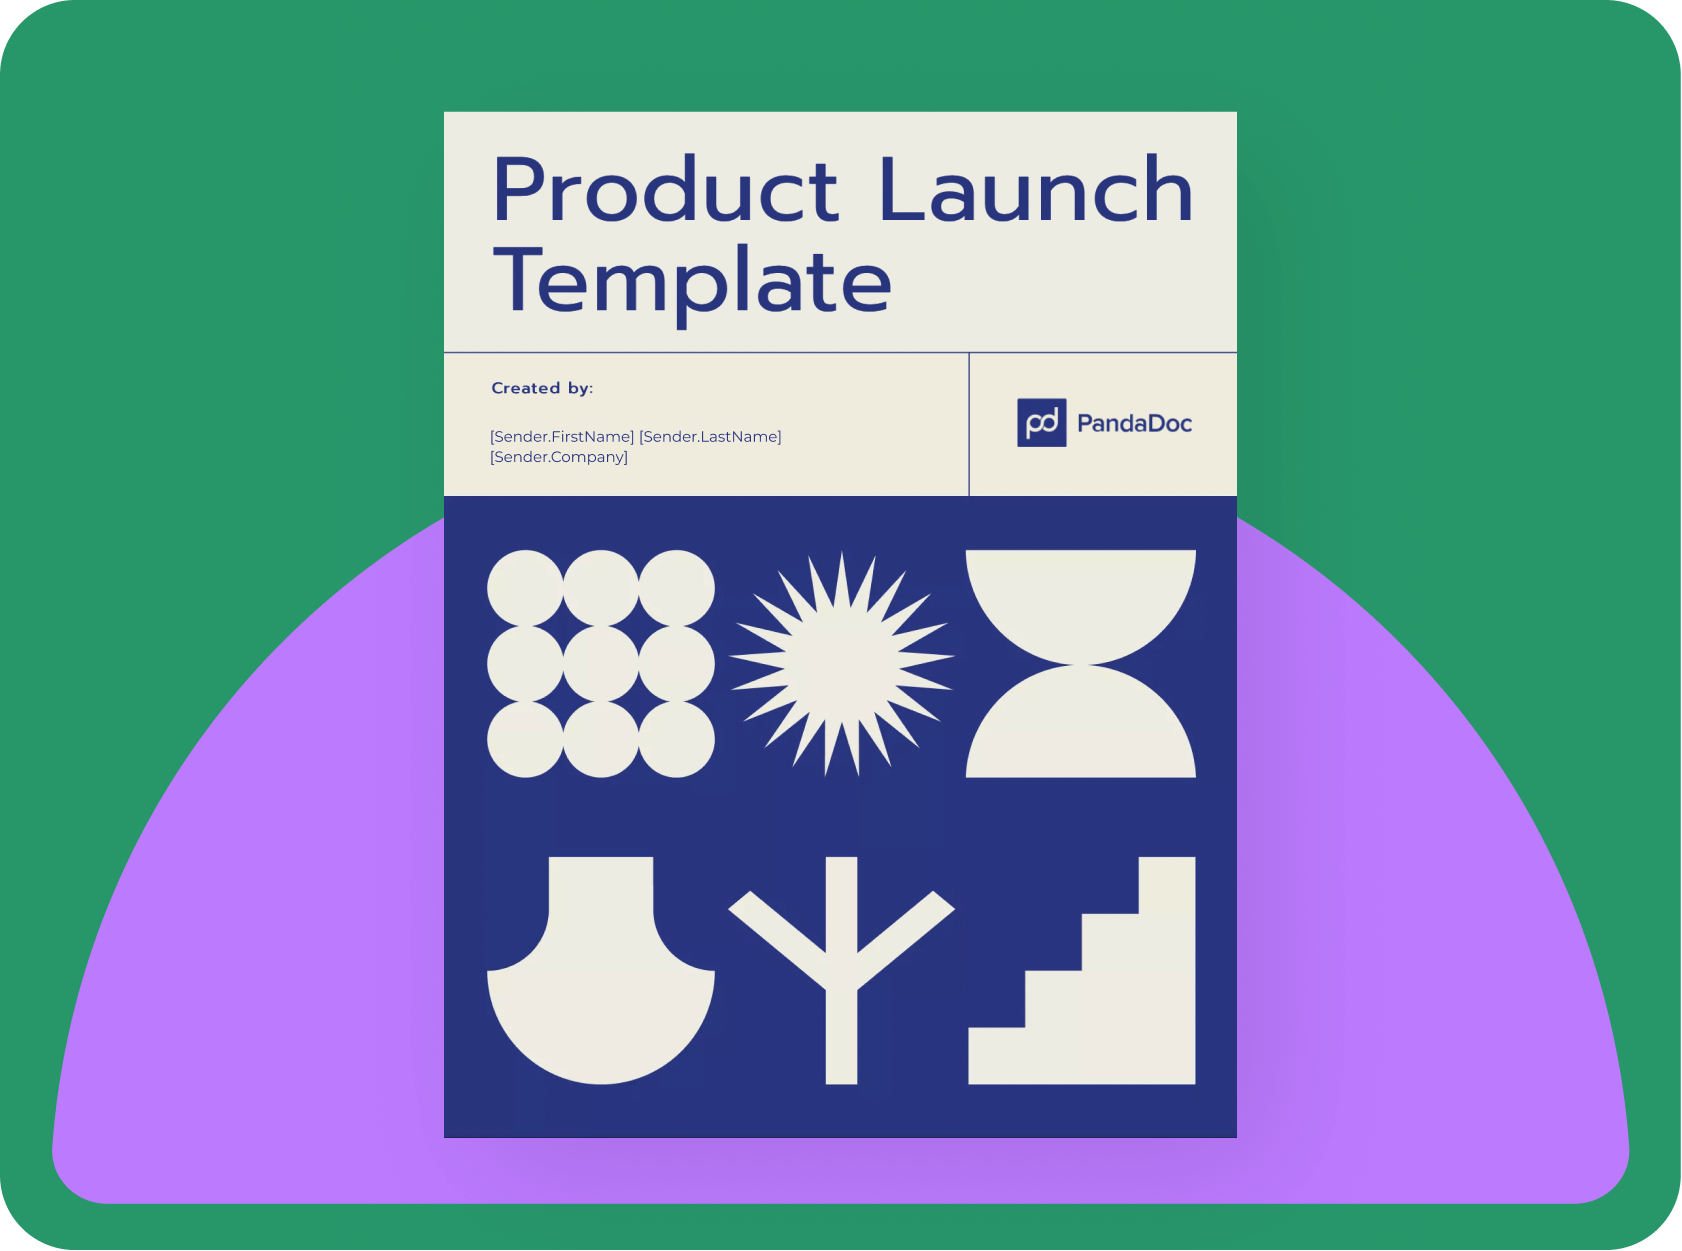 Product Launch Template PandaDoc